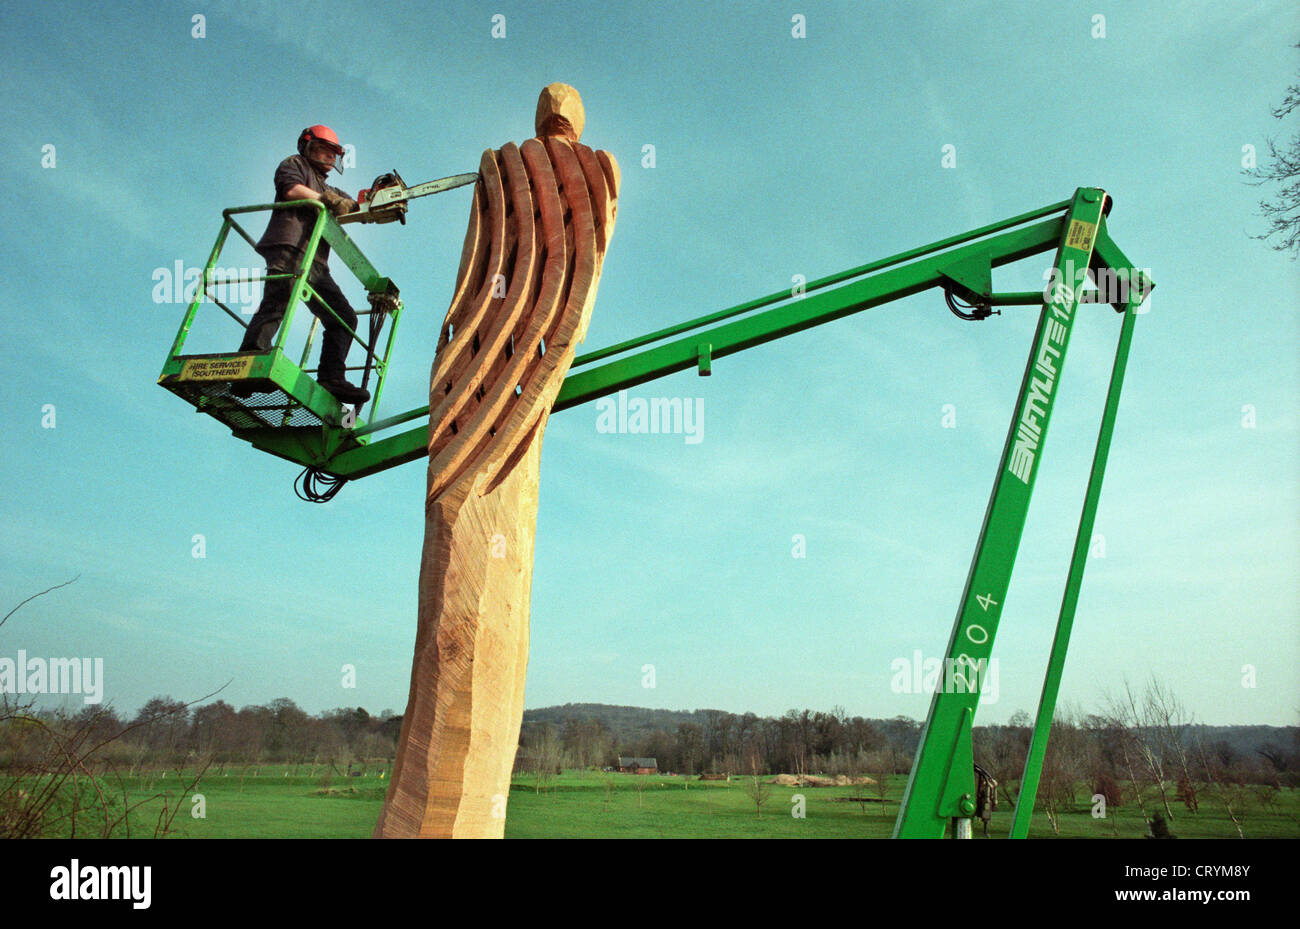 A chainsaw sculptor on the platform of a cherrypicker carving a lattice figure from a dead oak tree in Broadwater Park, Godalming, Surrey, England, UK. Stock Photo